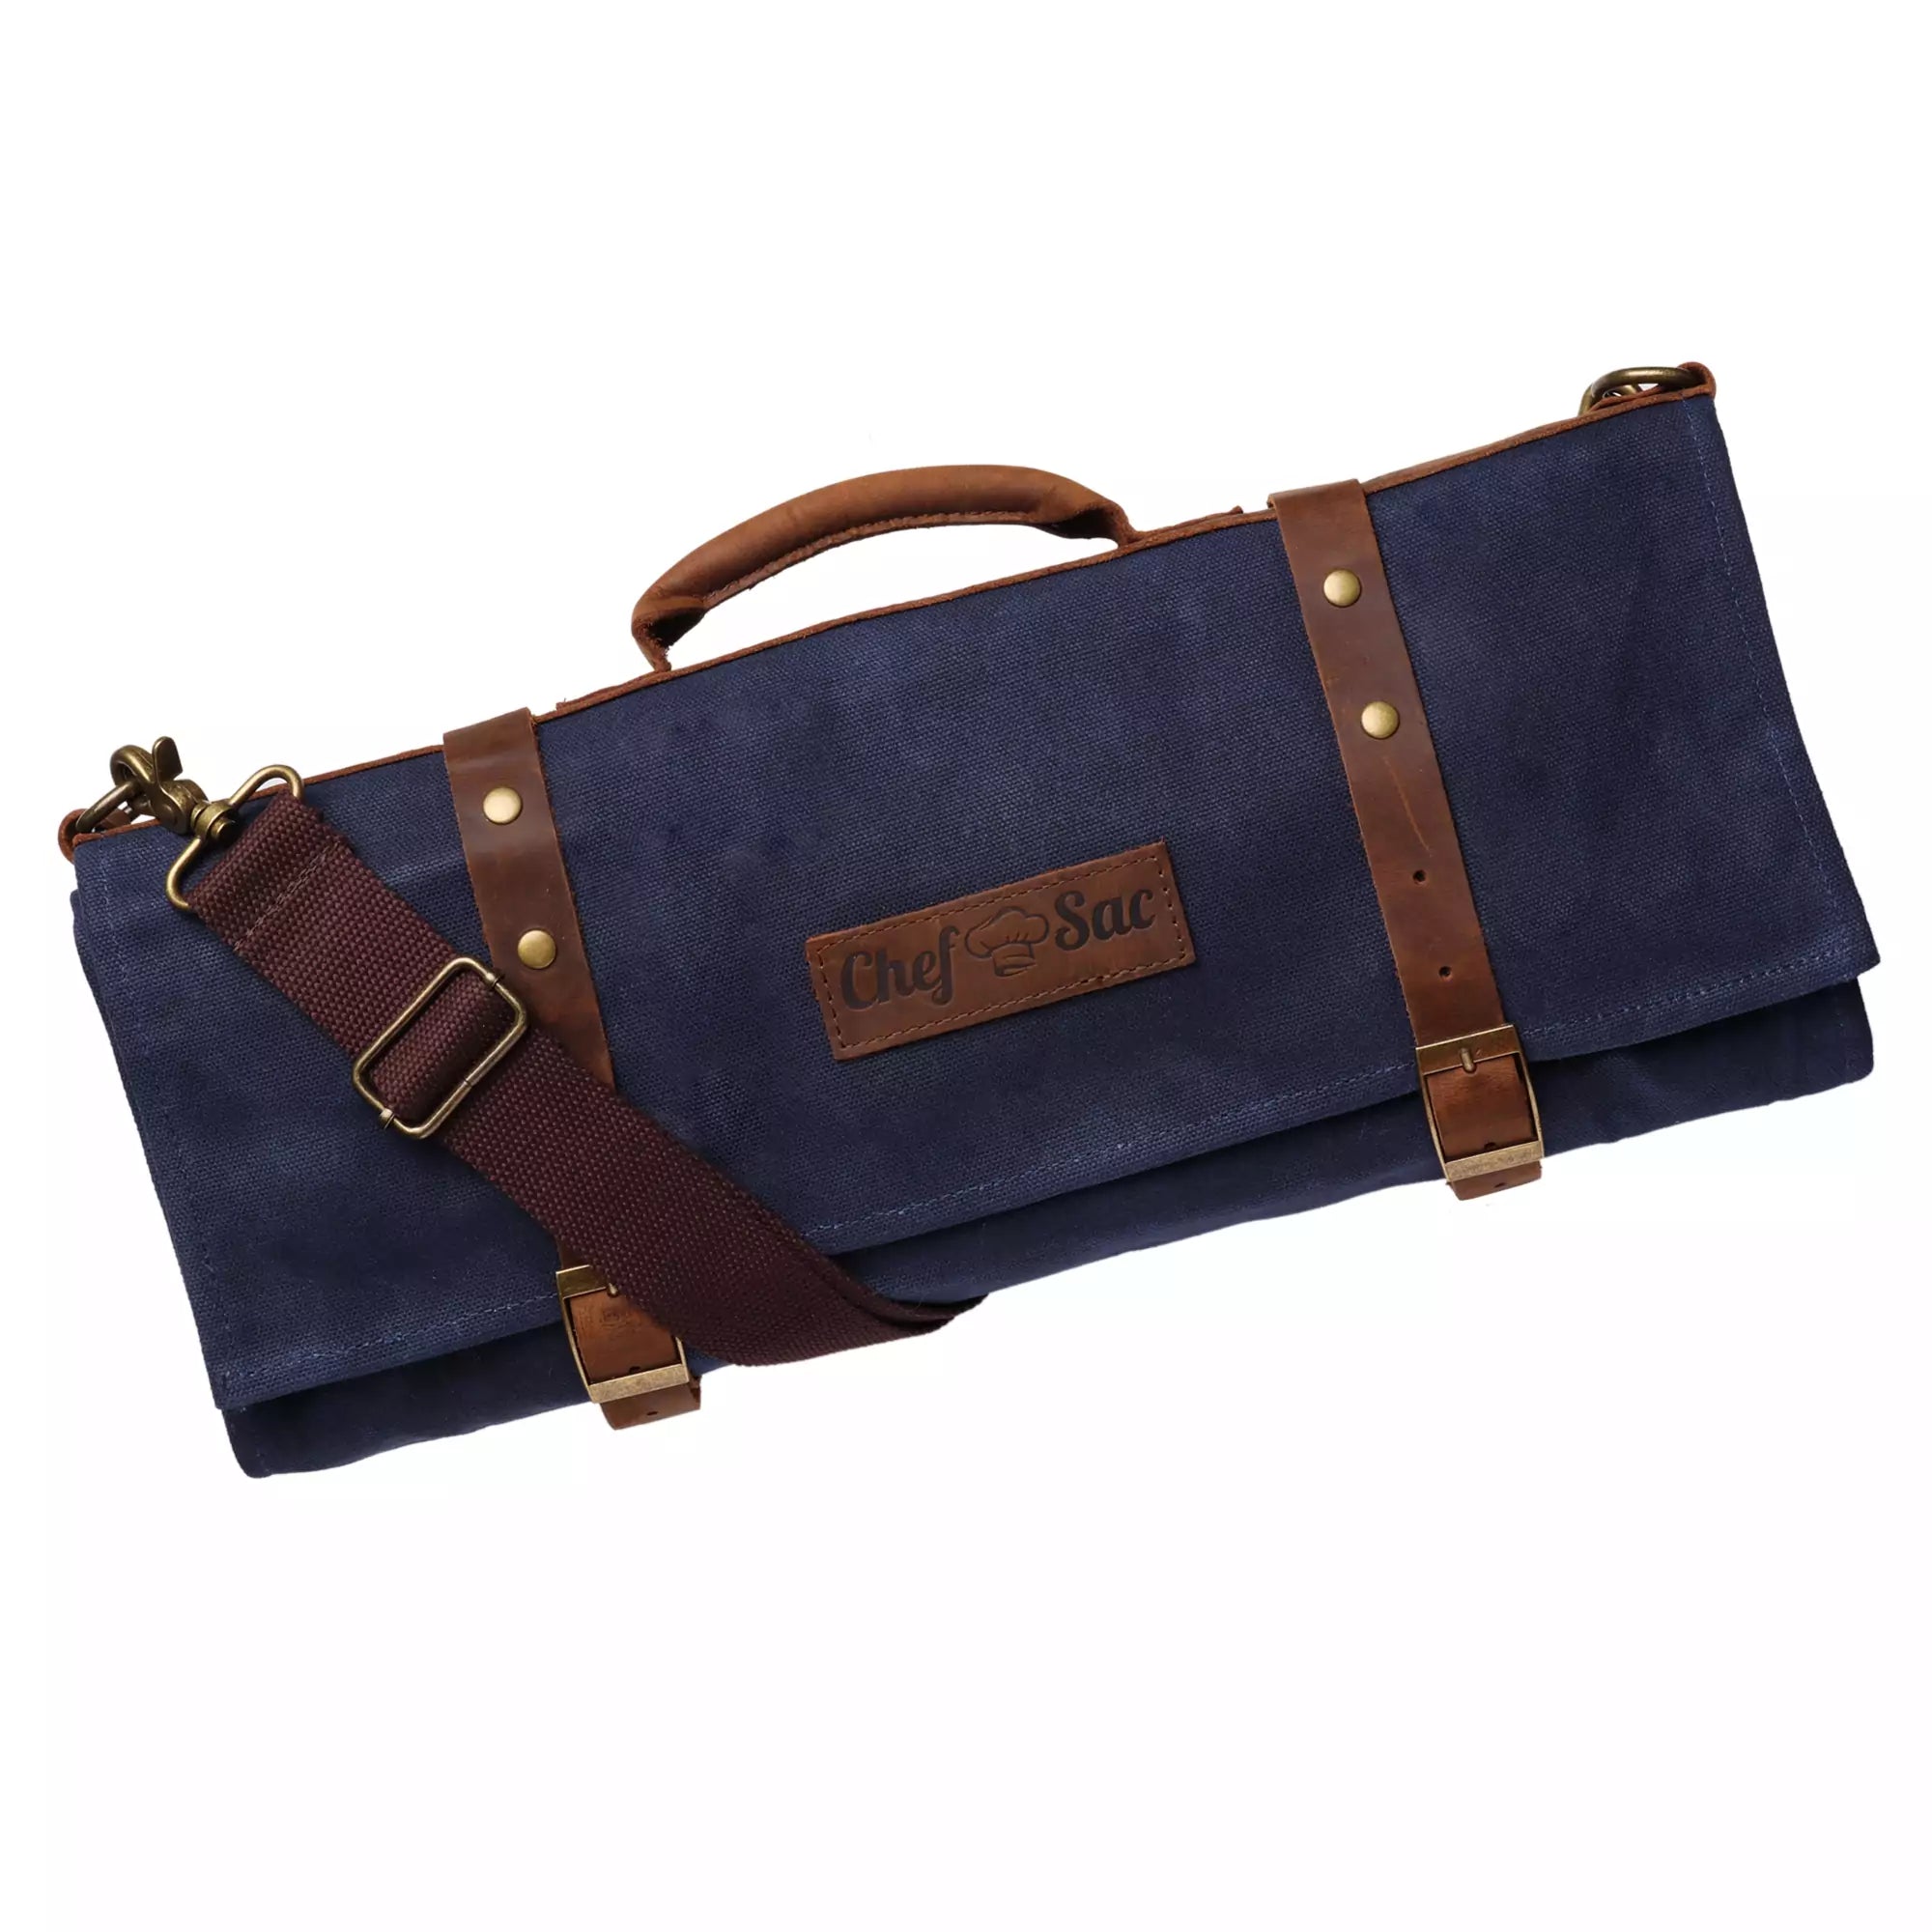 KOTAI Chef Knife Roll-up Bag - Leather & Canvas